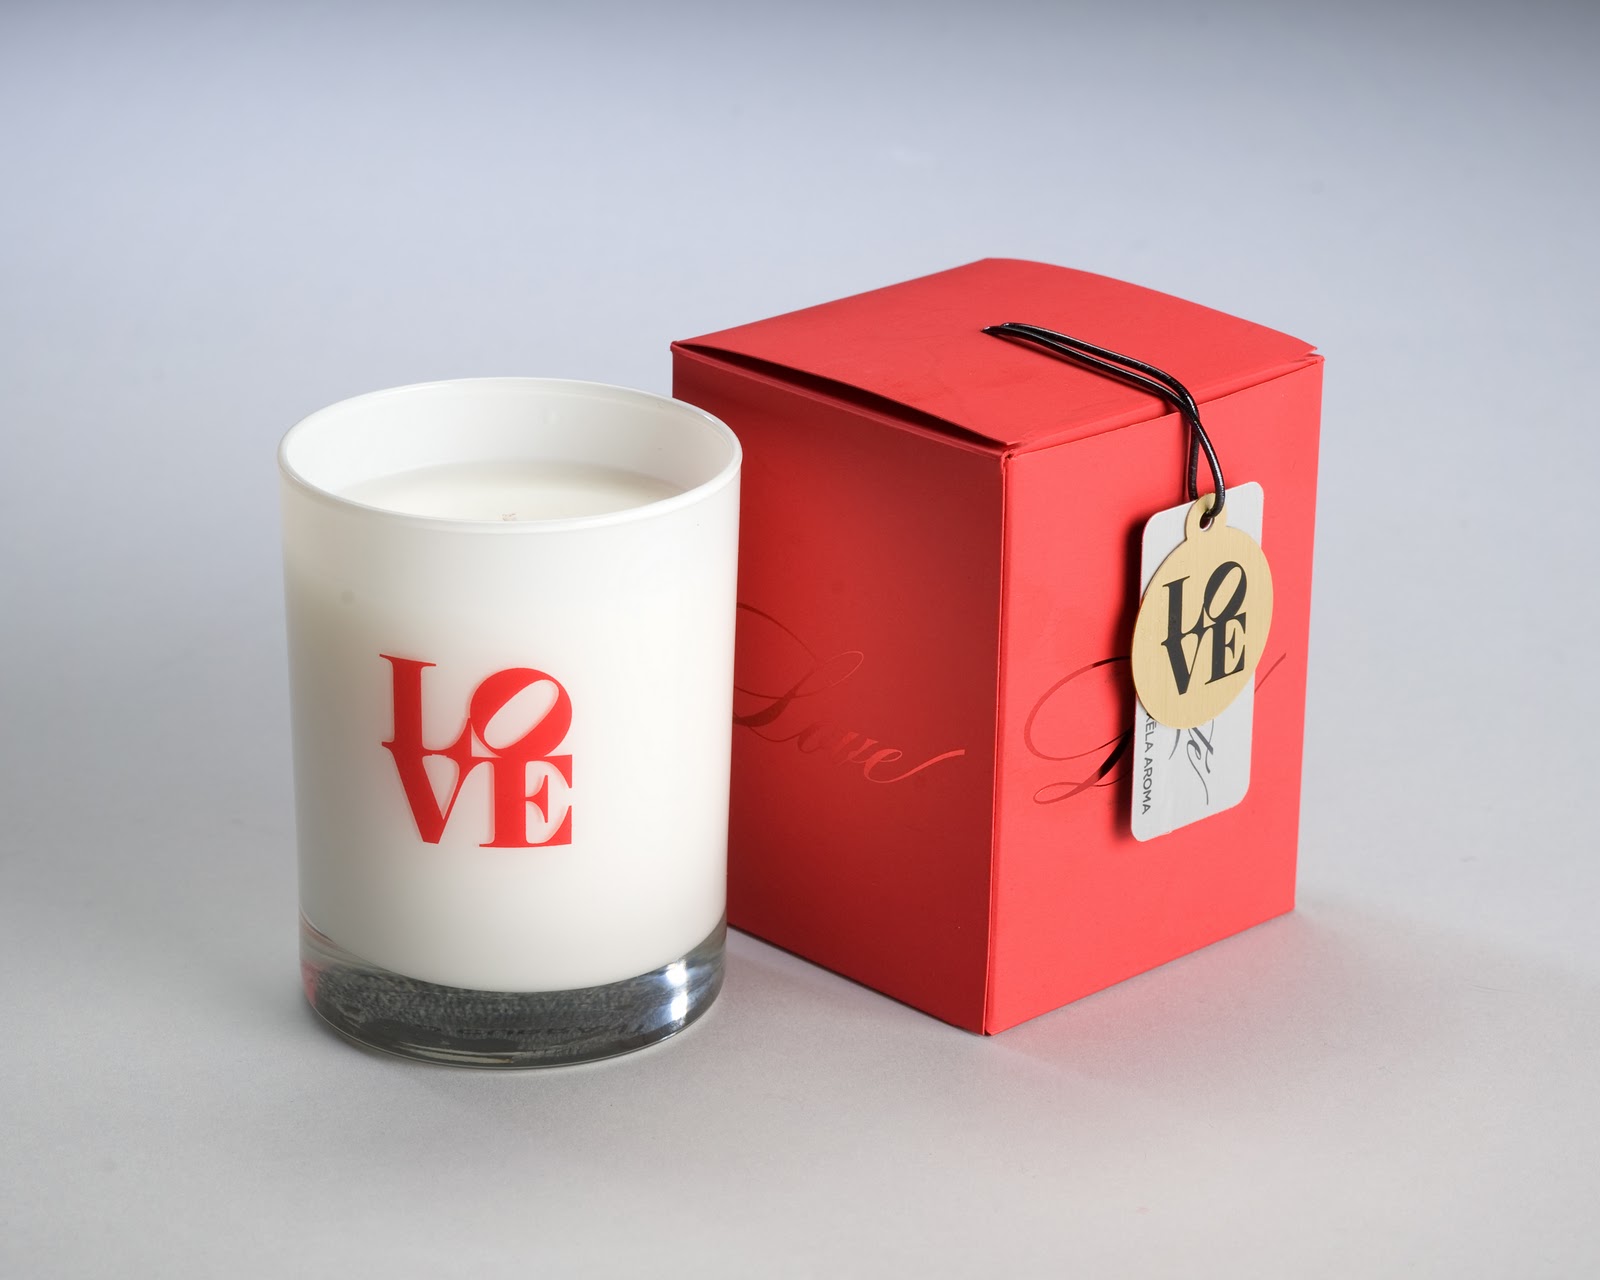 candle packaging boxes wholesale